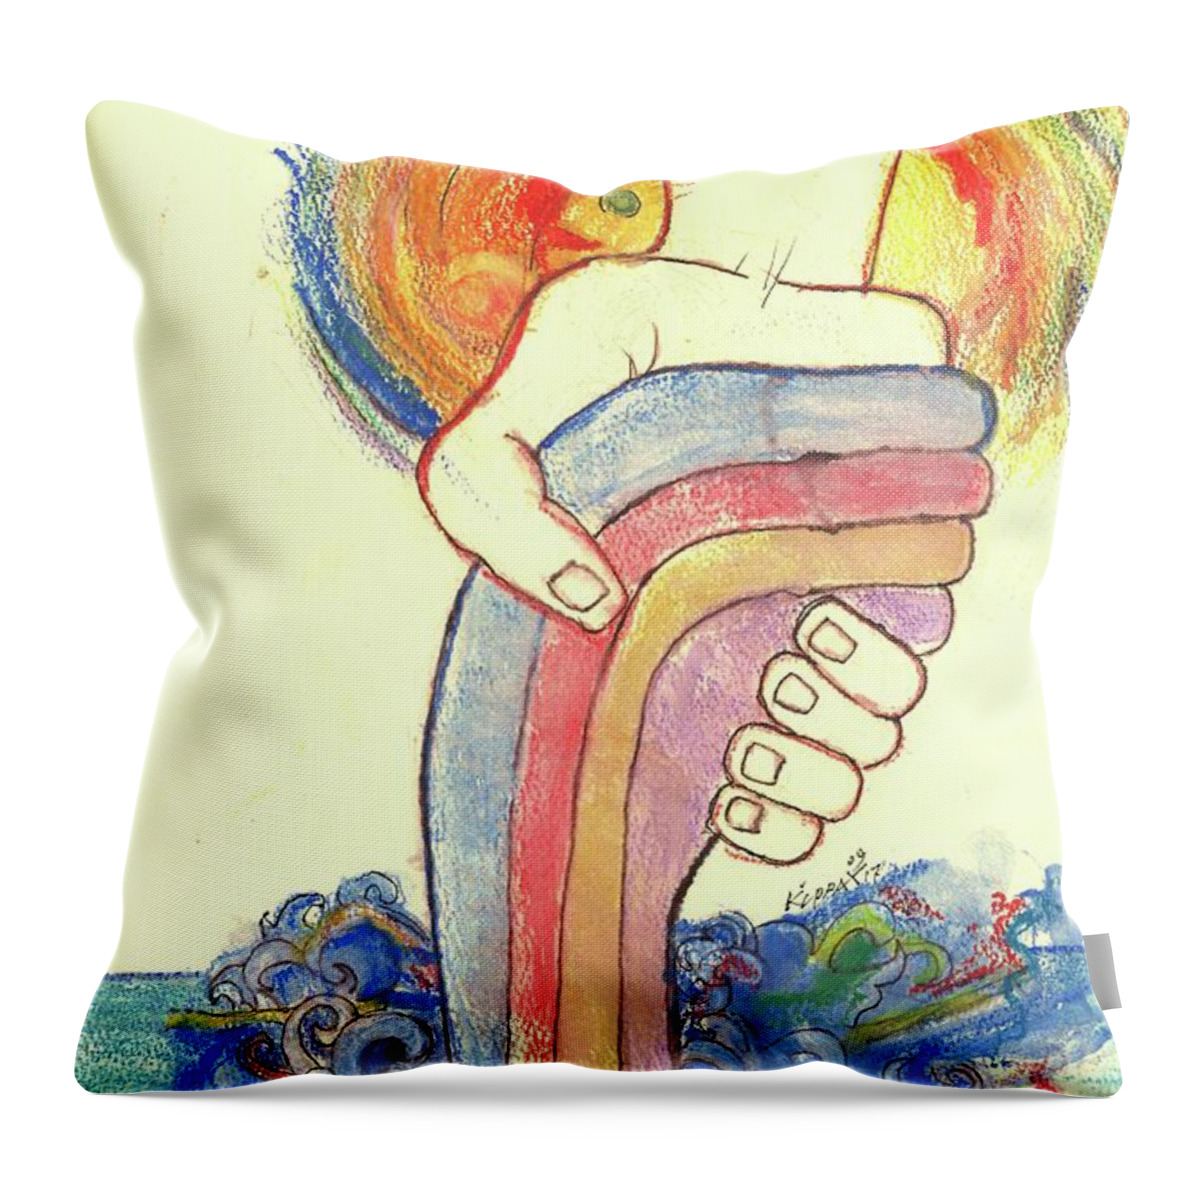 Hurricane # Harvey #irma #floodrescue #helpinghand #providence #inthenickoftime.#peoplerescue Throw Pillow featuring the mixed media Hurricane Relief by Kippax Williams